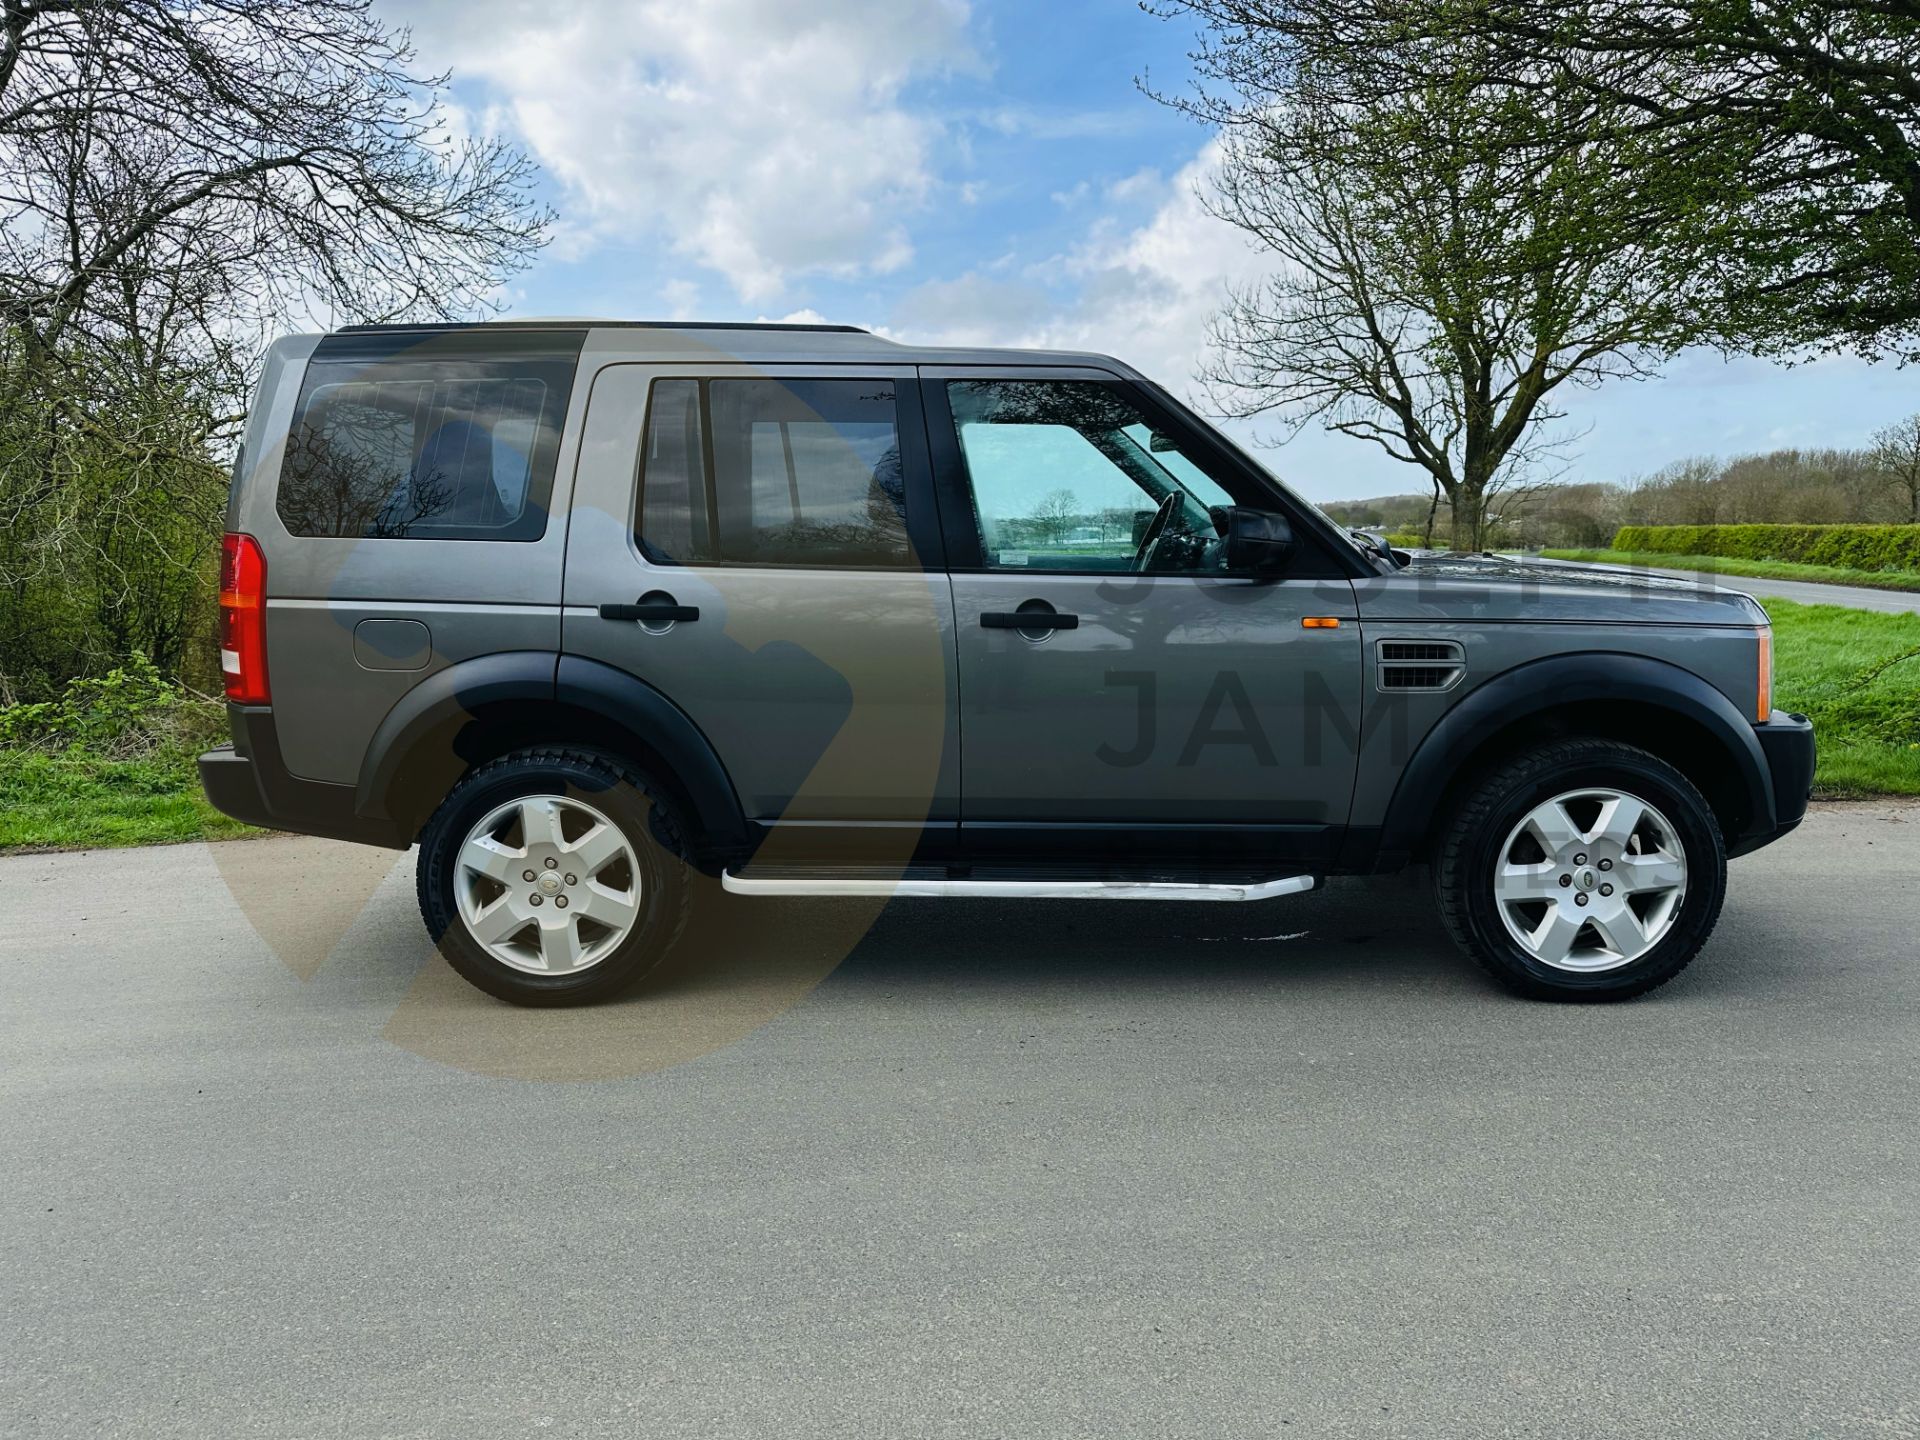 (ON SALE) LAND ROVER DISCOVERY TDV6 *HSE EDITION* AUTO (08 REG) 7 SEATER - 12X SERVICES (NO VAT) - Image 12 of 51